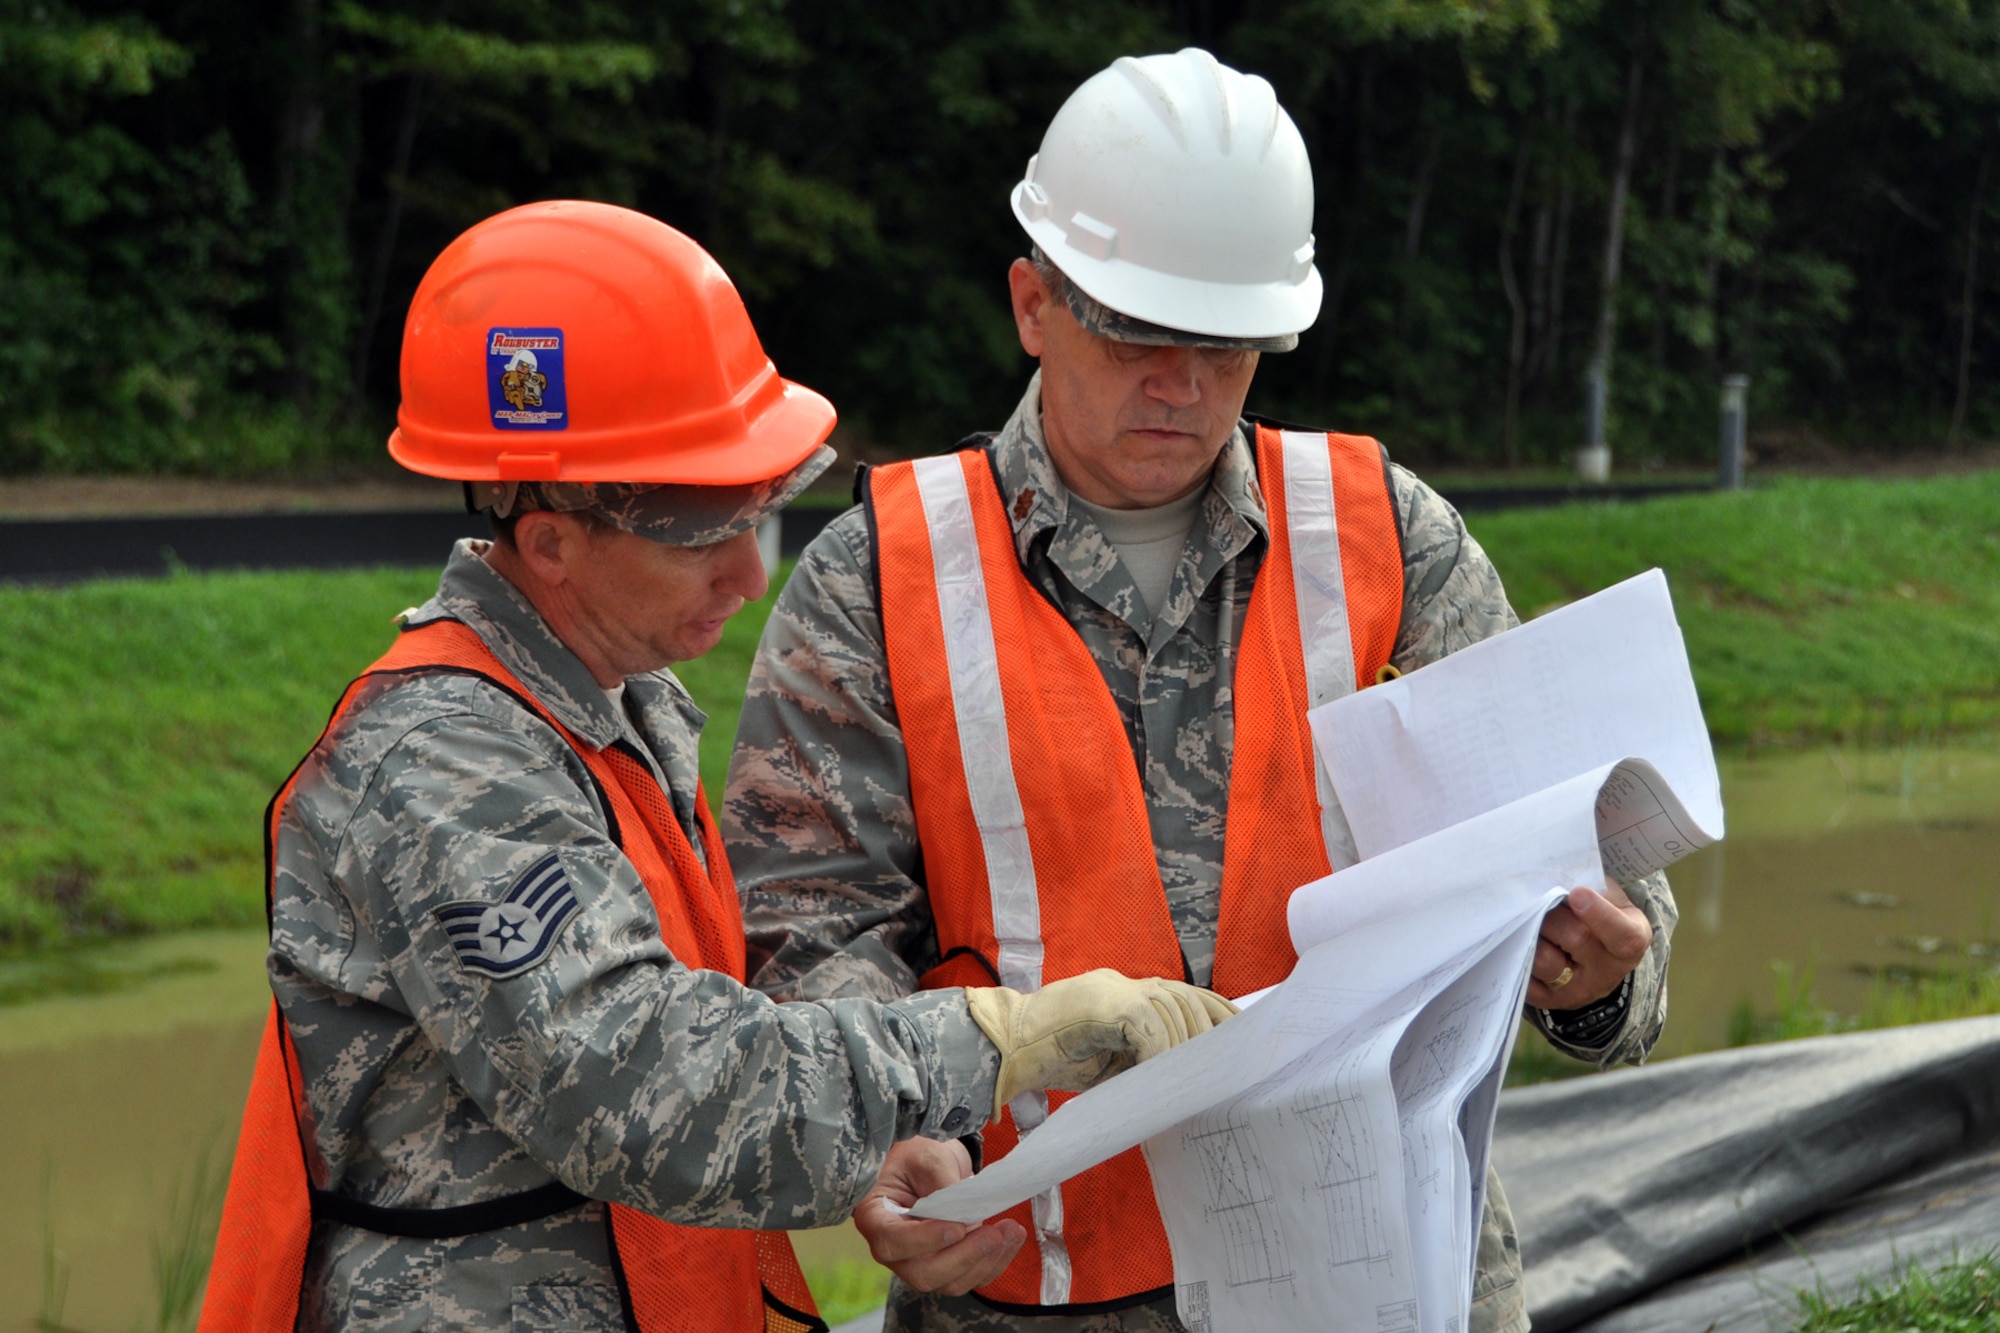 Staff Sgt Robert Ataway, a structures craftsman assigned to the 307th Civil Engineer Squadron from Barksdale Air Force Base, La., talks with Maj. Allen Spillers, chief of operations, 307 CES, about the next phase of construction of a Pre-Engineered Building at Youngstown Air Reserve Station, Vienna, Ohio, Aug. 14, 2012. They were part of a 29-person detail from Barksdale that spent two weeks at Youngstown ARS assisting 910th Civil Engineer Squadron personnel build a Prime Base Engineer Emergency Force (Prime BEEF) training area. (U.S. Air Force photo by Master Sgt. Jeff Walston)